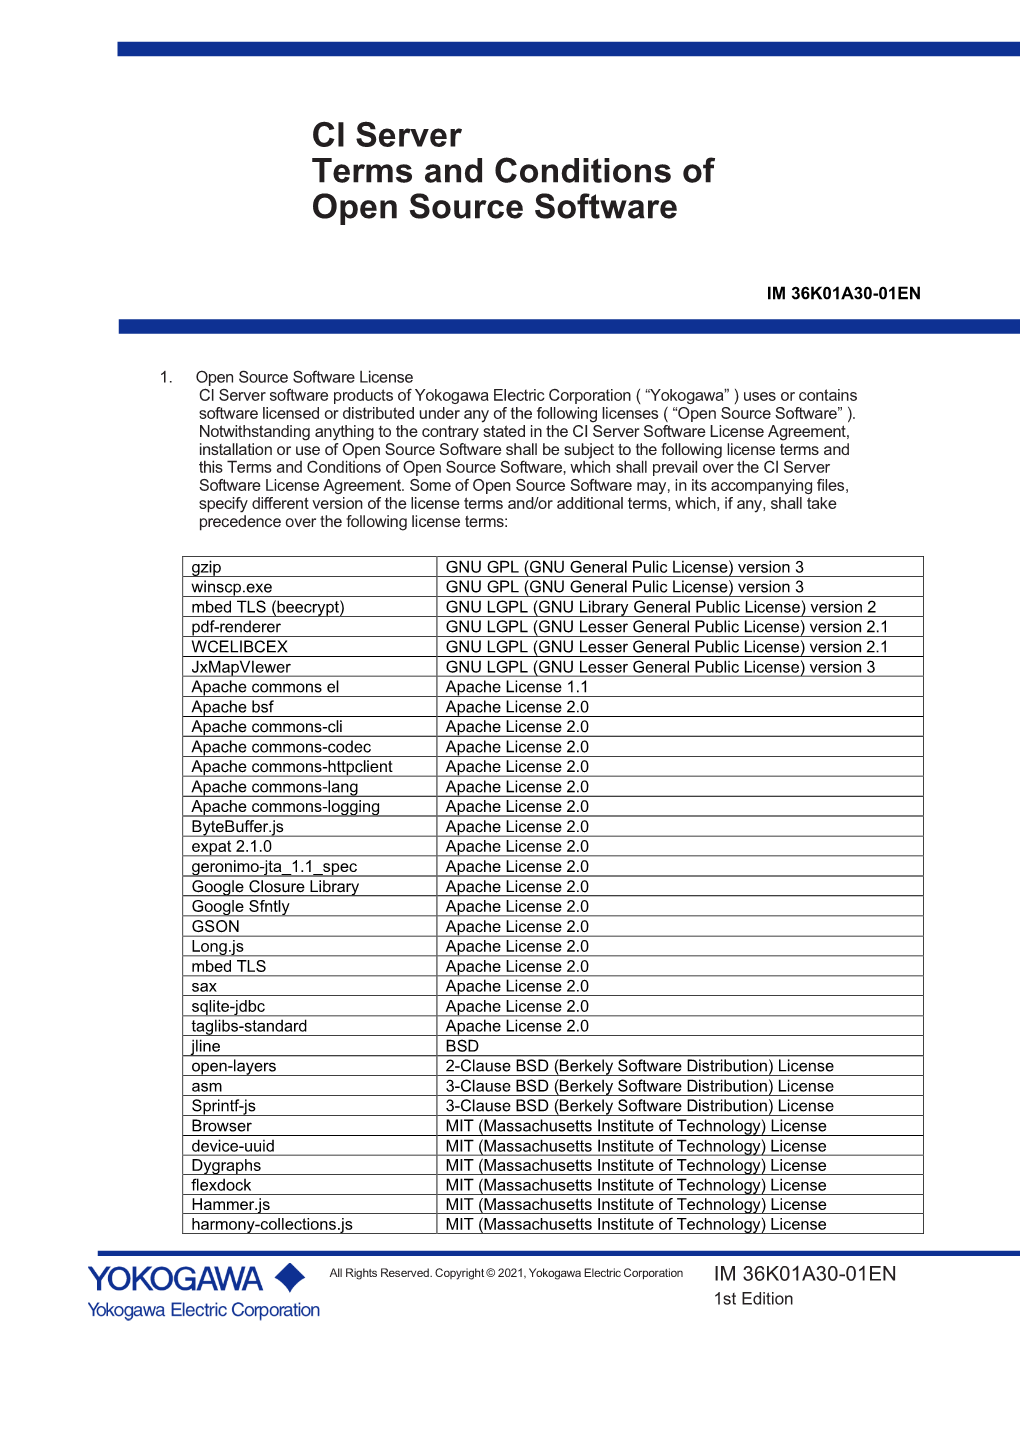 CI Server Terms and Conditions of Open Source Software> Ii